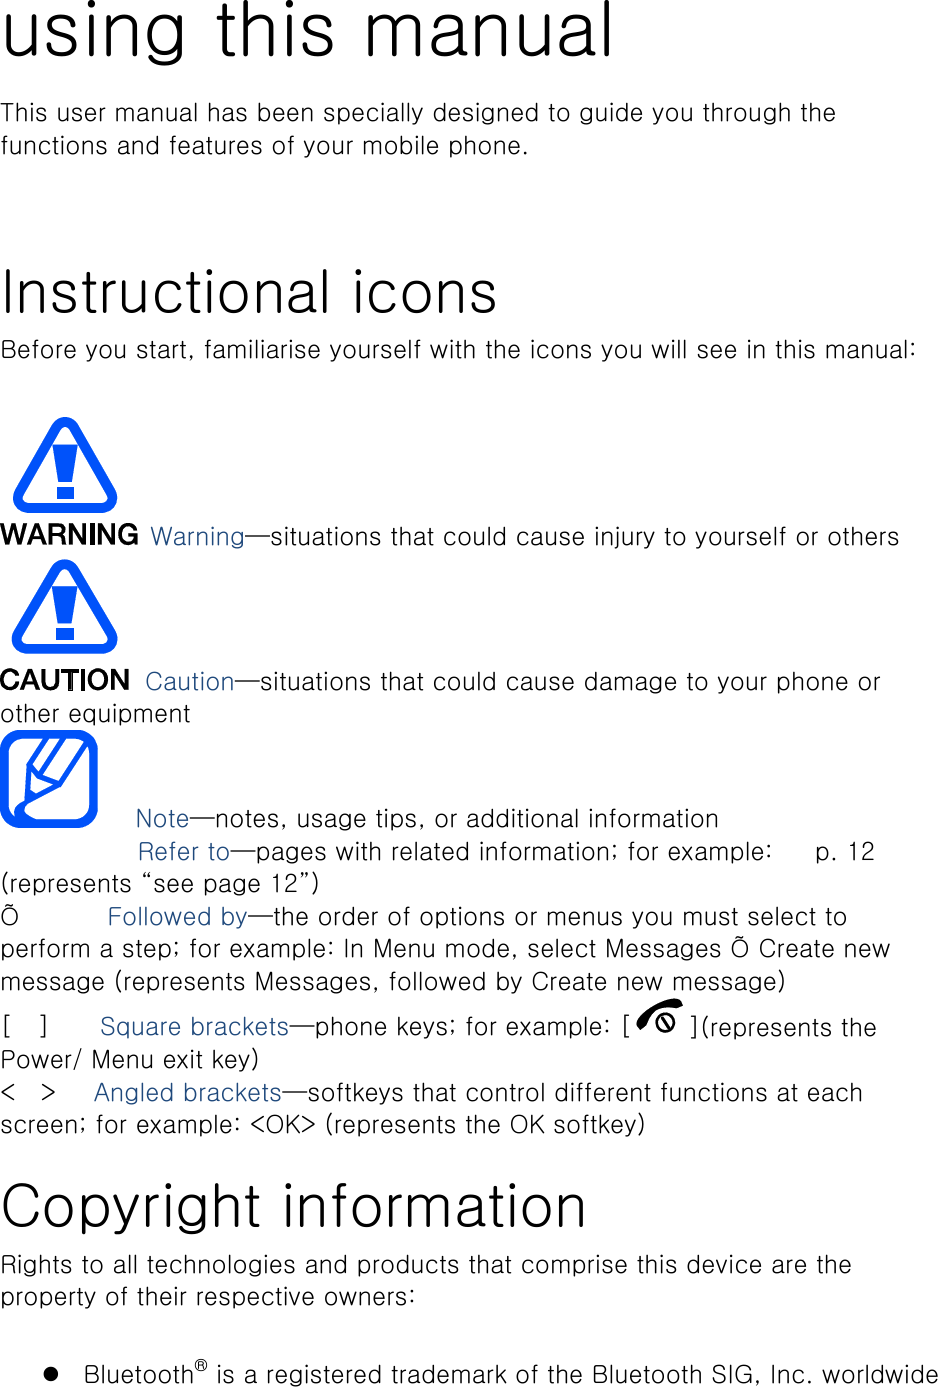 using this manual This user manual has been specially designed to guide you through the functions and features of your mobile phone.      Instructional icons Before you start, familiarise yourself with the icons you will see in this manual:     Warning—situations that could cause injury to yourself or others  Caution—situations that could cause damage to your phone or other equipment    Note—notes, usage tips, or additional information   　       Refer to—pages with related information; for example: 　 p. 12 (represents “see page 12”) Õ       Followed by—the order of options or menus you must select to perform a step; for example: In Menu mode, select Messages Õ Create new message (represents Messages, followed by Create new message) [  ]    Square brackets—phone keys; for example: [ ](represents the Power/ Menu exit key) &lt;  &gt;   Angled brackets—softkeys that control different functions at each screen; for example: &lt;OK&gt; (represents the OK softkey)  Copyright information Rights to all technologies and products that comprise this device are the property of their respective owners:  z Bluetooth® is a registered trademark of the Bluetooth SIG, Inc. worldwide 